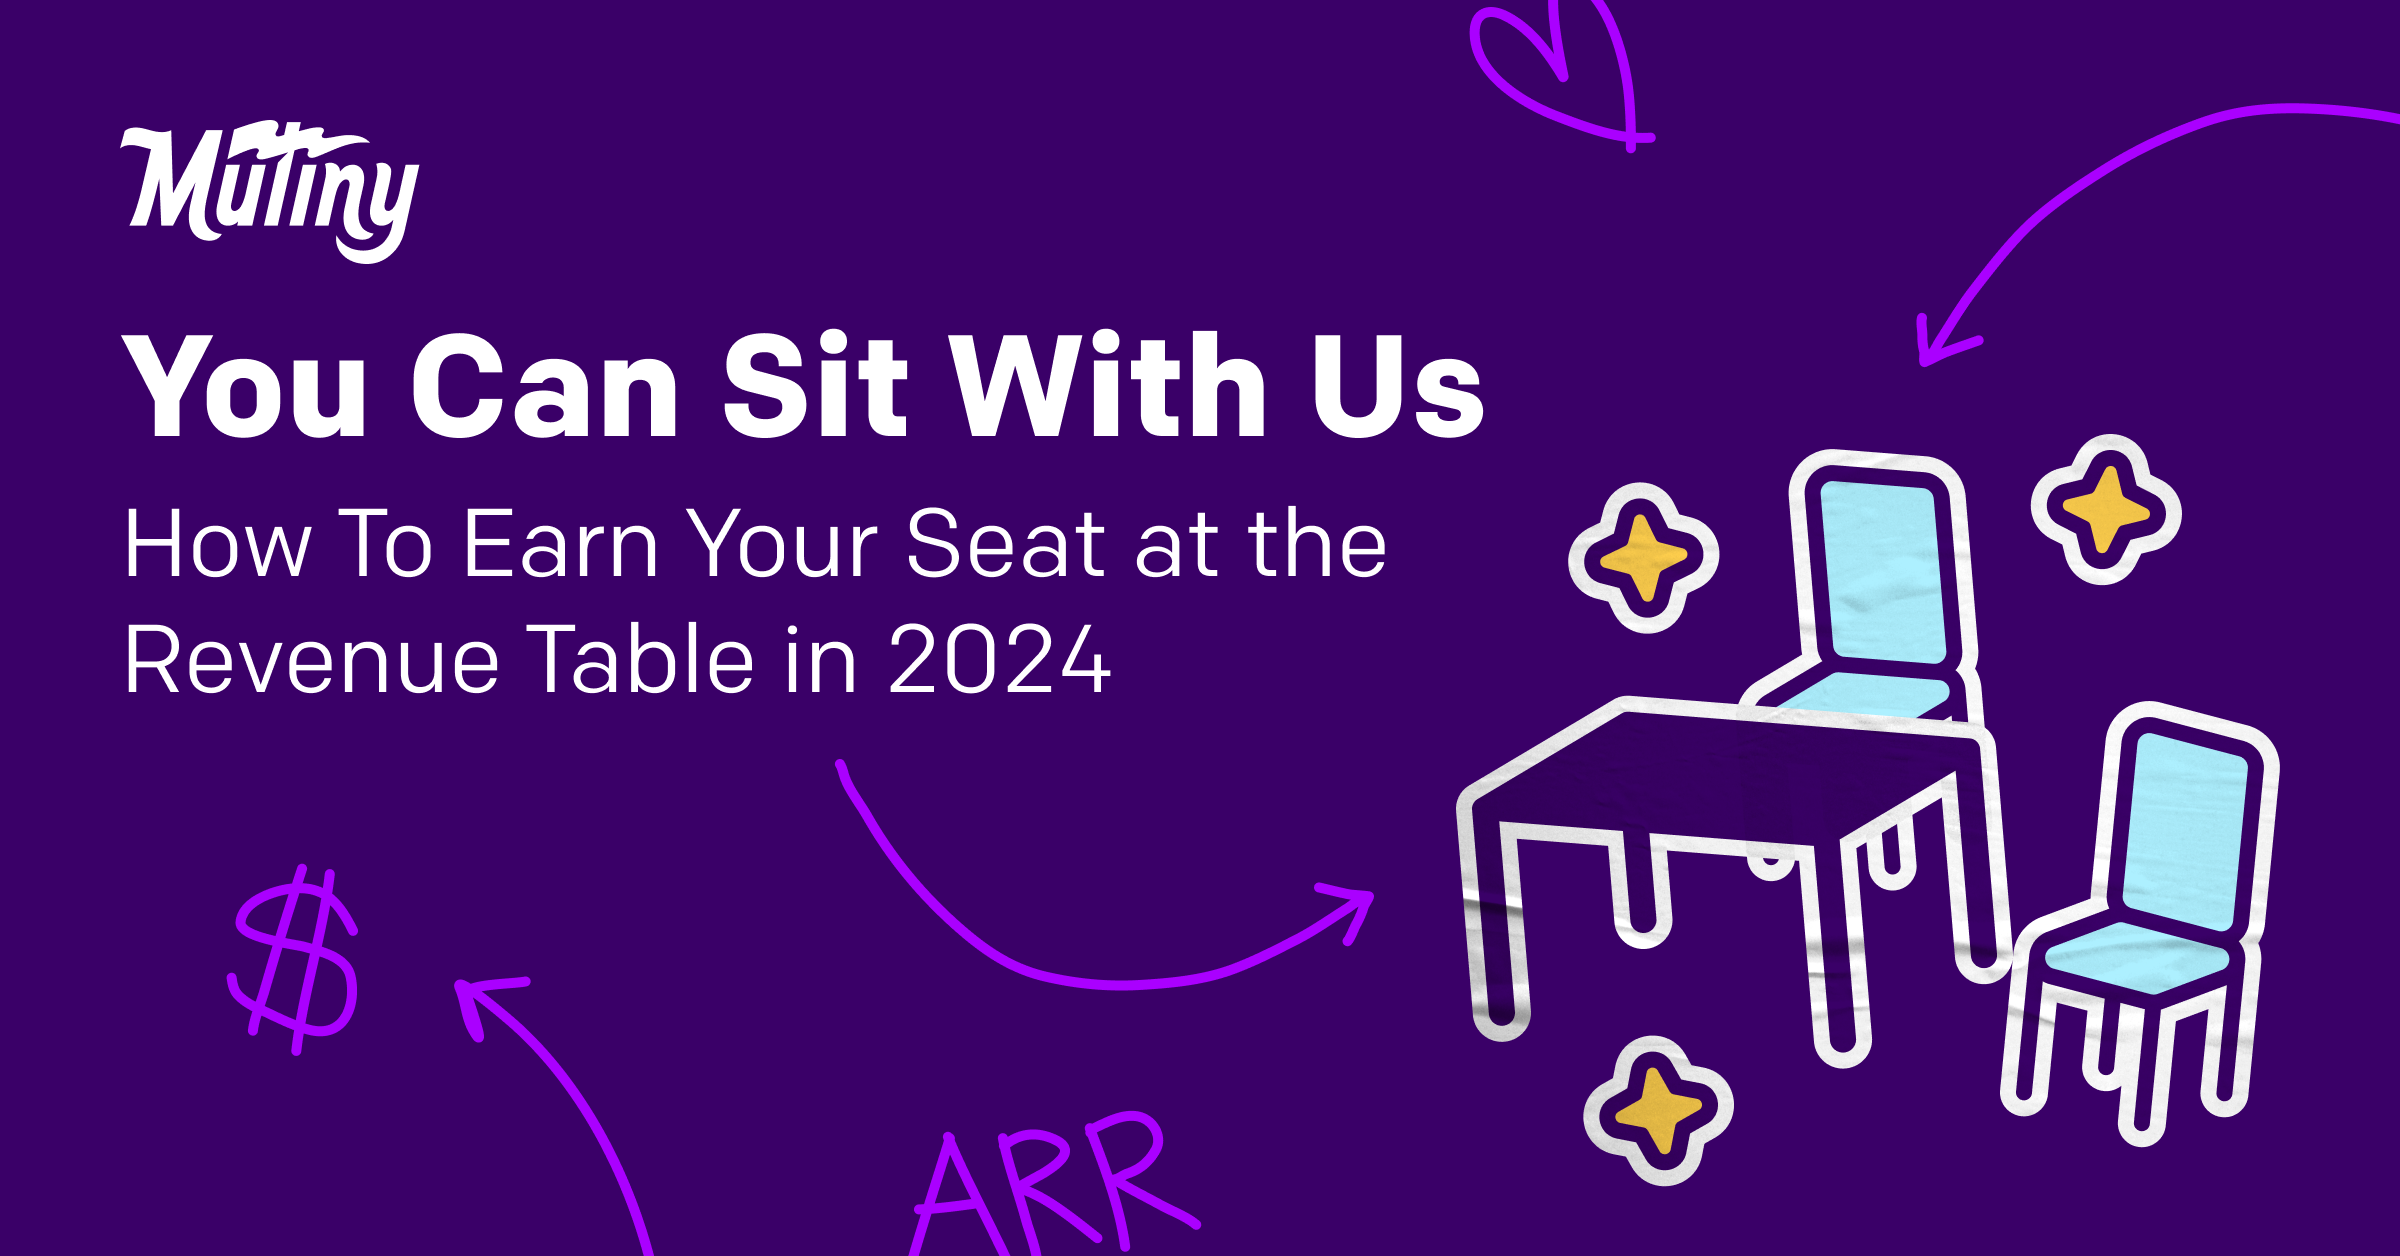 You Can Sit With Us: How To Earn Your Seat At The Revenue Table in 2024